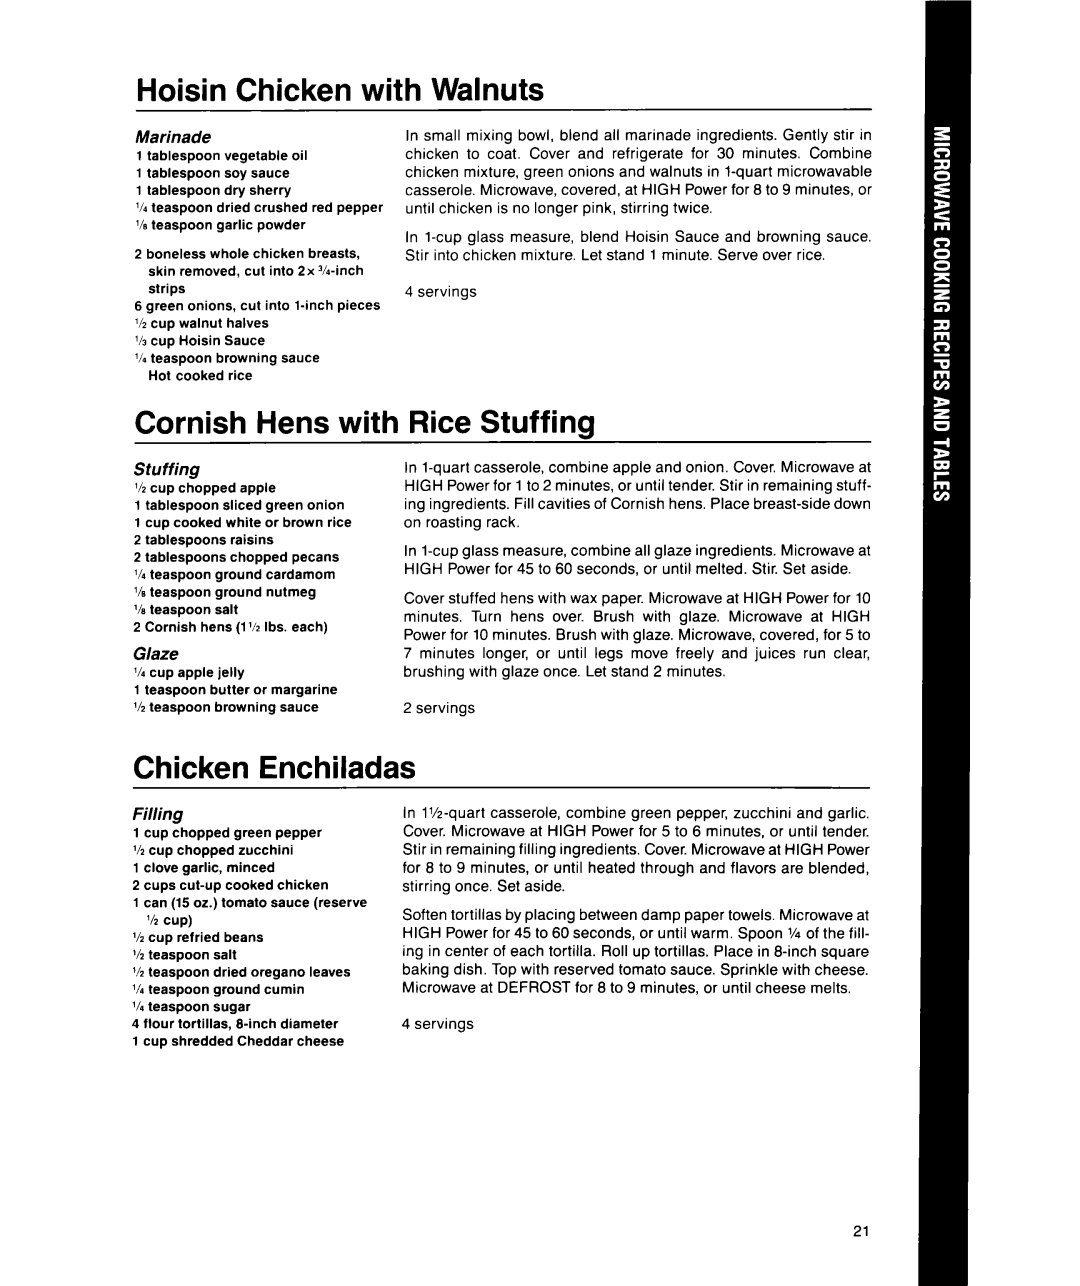 Whirlpool MS1600XW manual Hoisin Chicken with Walnuts, Cornish Hens with Rice Stuffing, Chicken Enchiladas, Glaze, Filling 